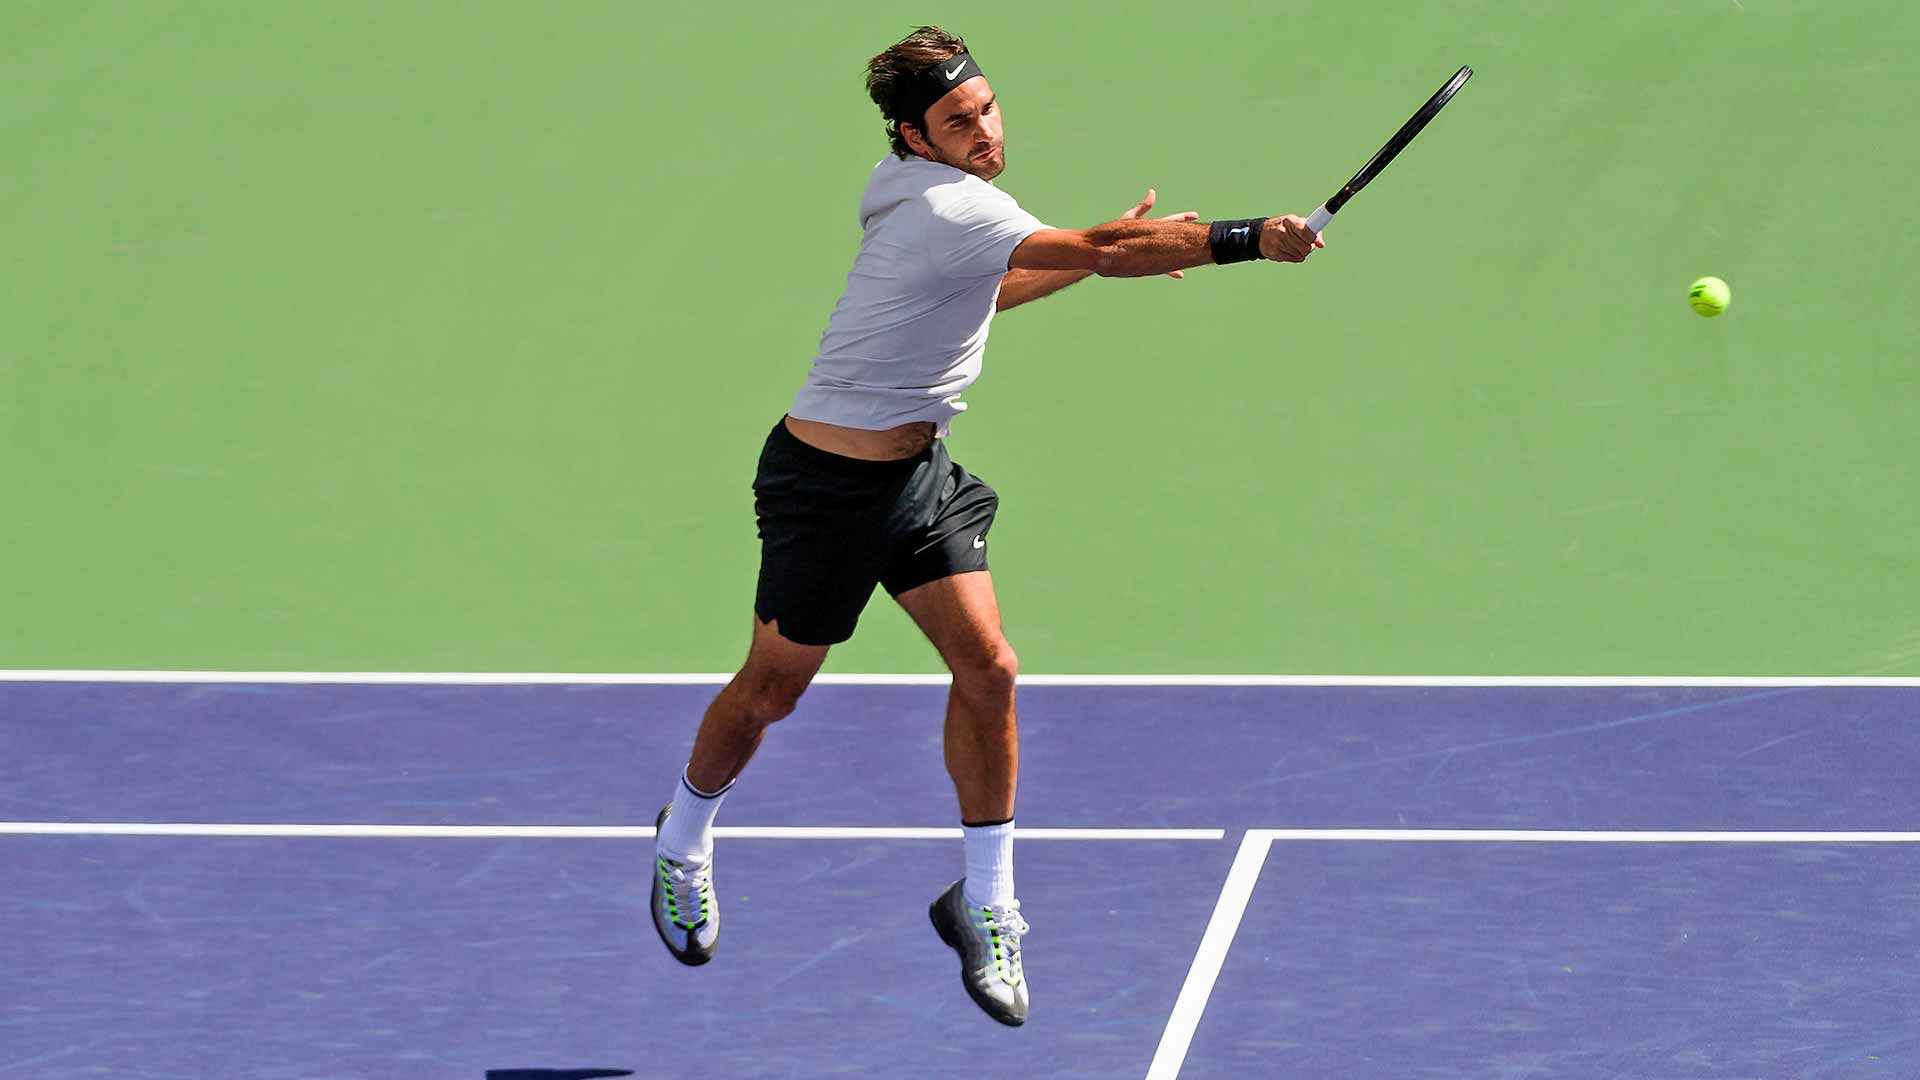 Roger Federer improves to a personal-best 17-0 to start a season with a gritty three-set win over Borna Coric to reach the BNP Paribas Open final.